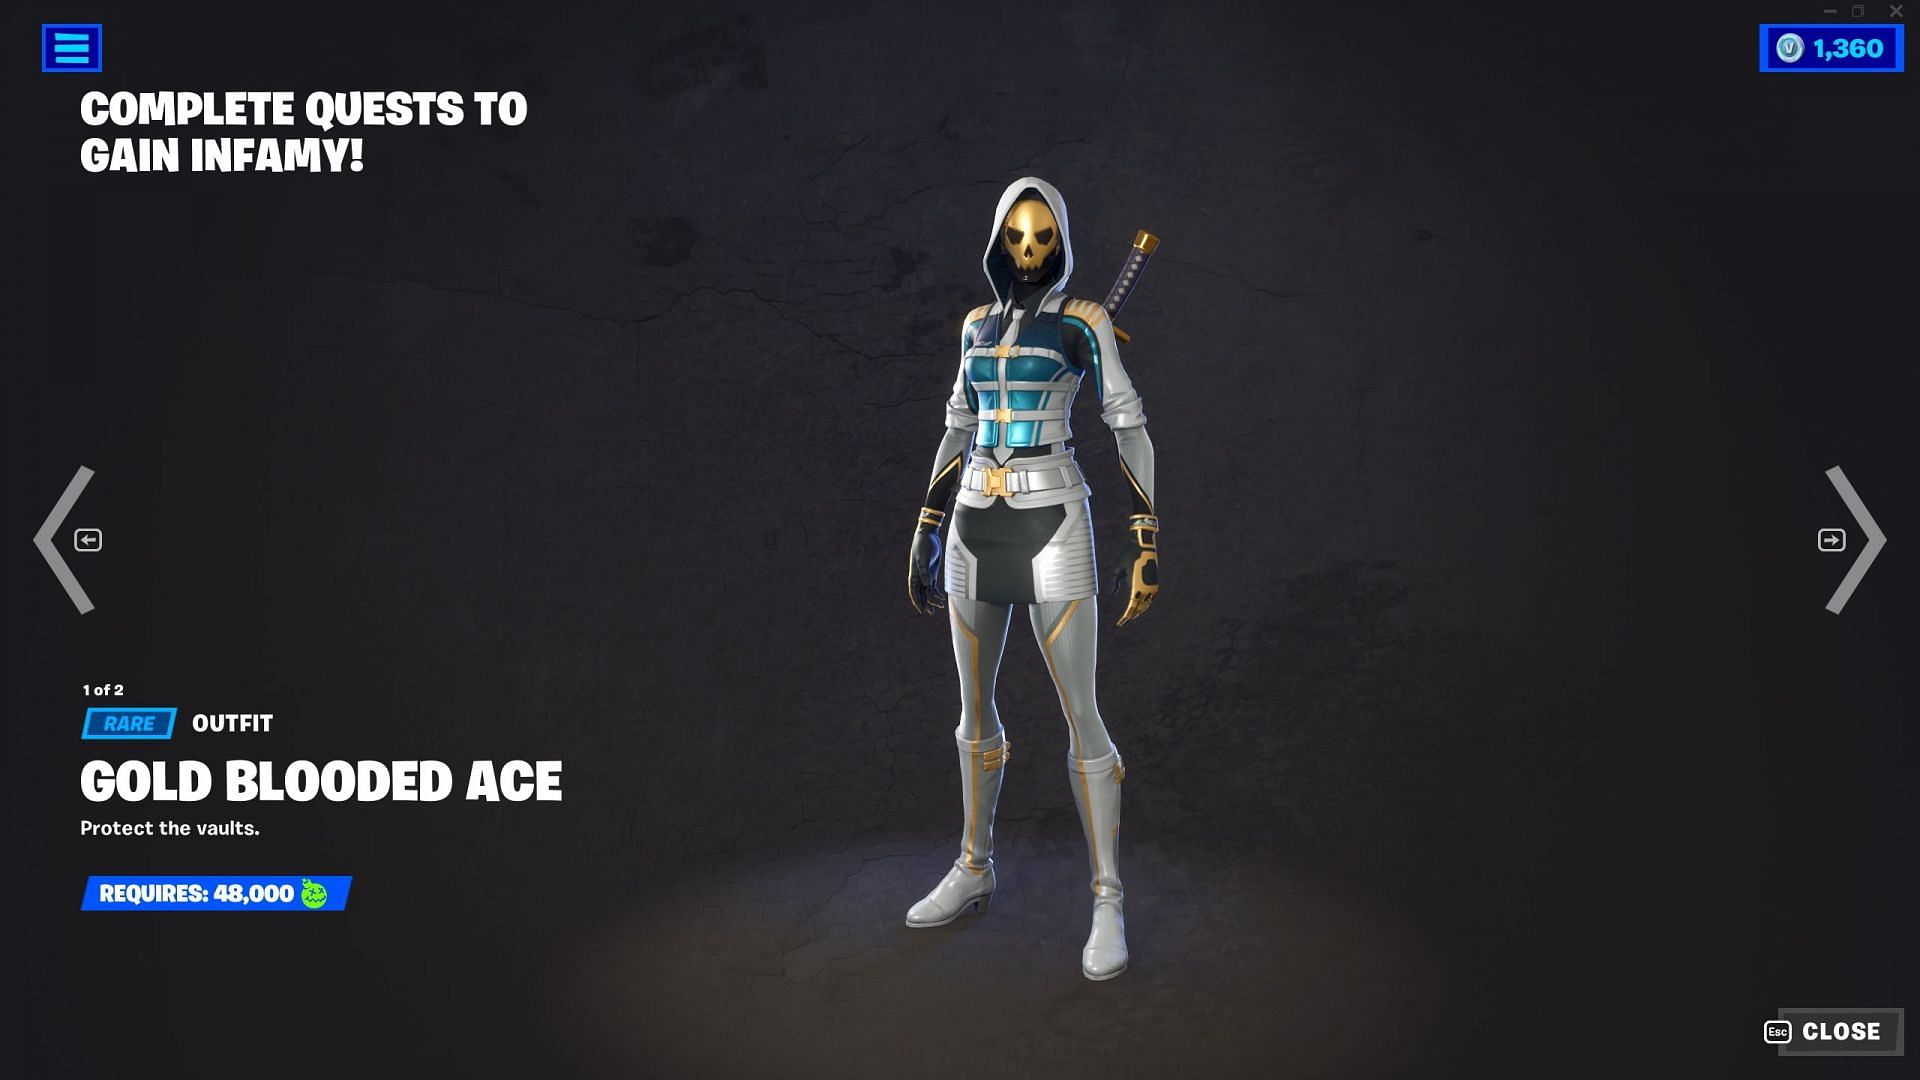 The skin is available for a limited time through the Most Wanted event (Image via Epic Games)